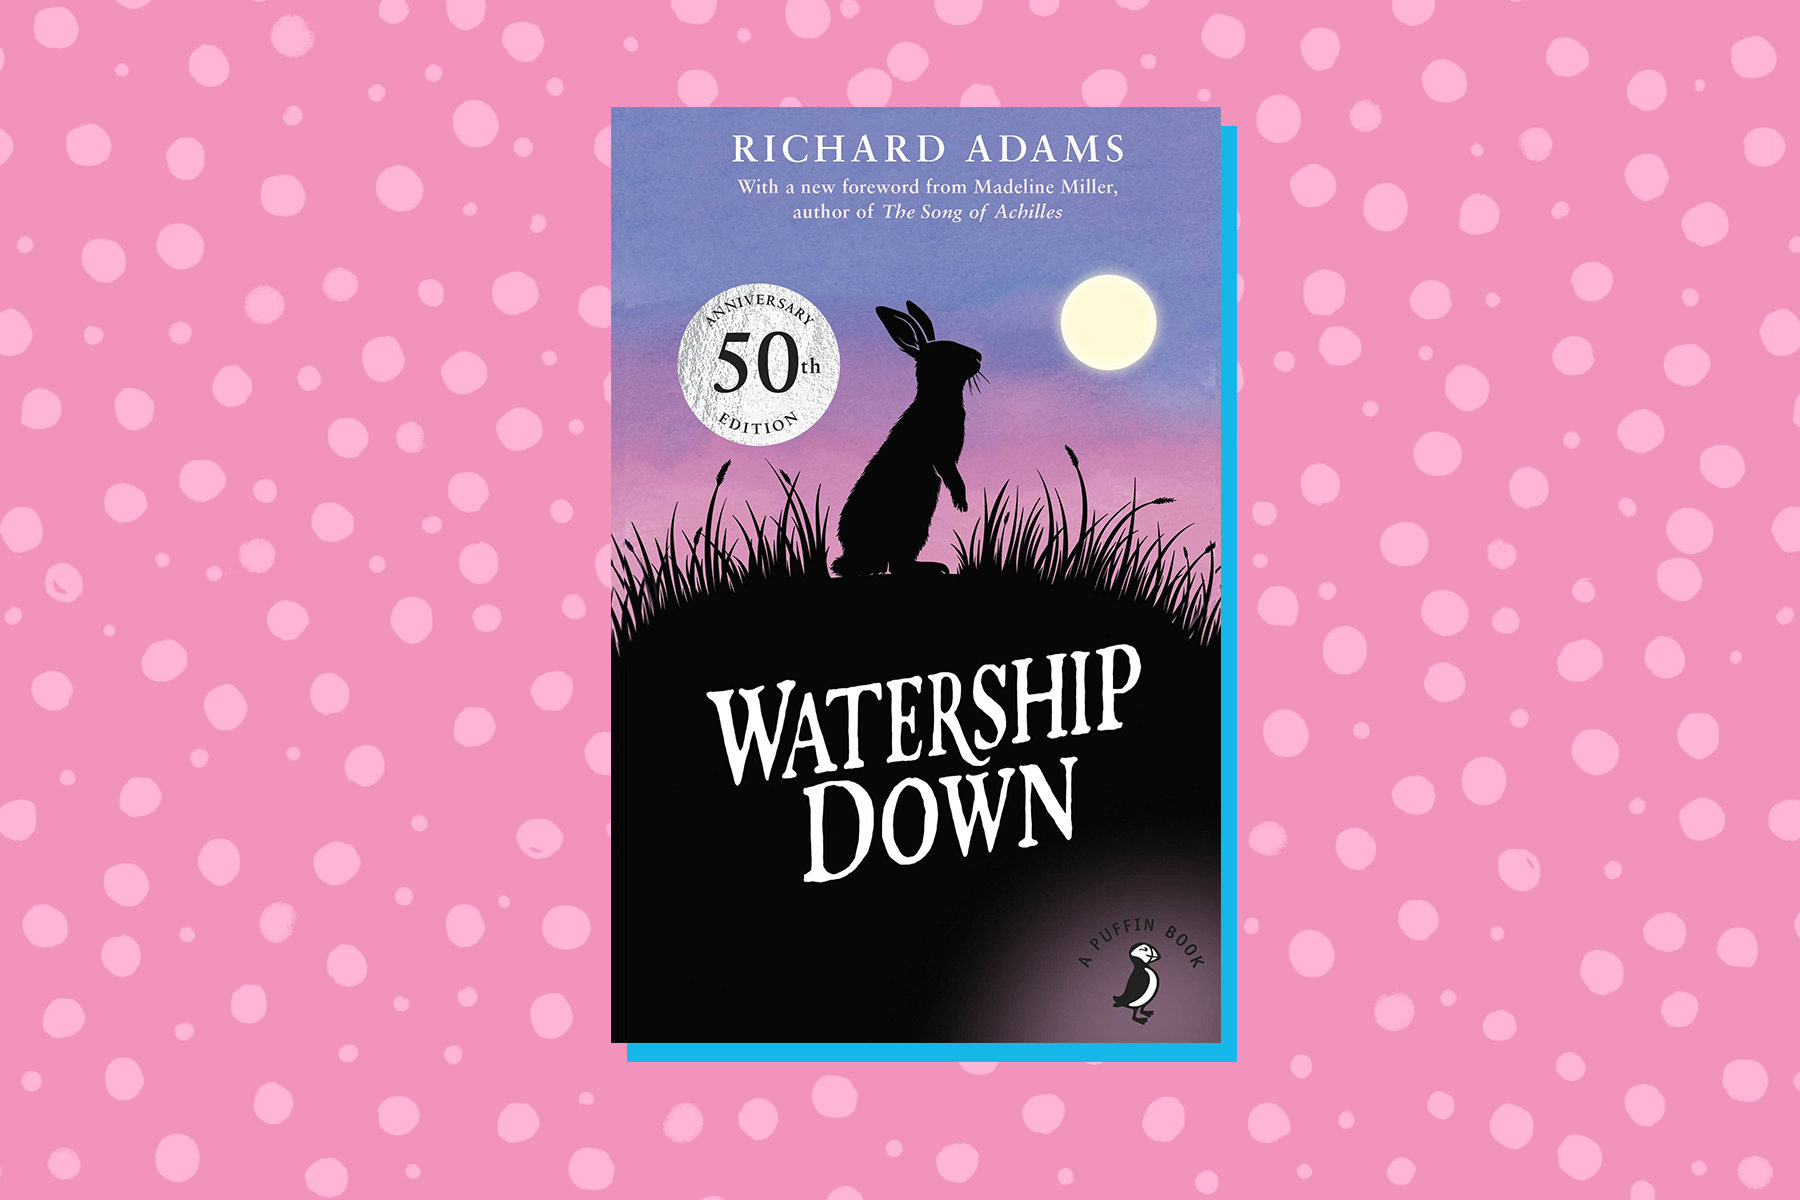 An image of the 50th anniversary front cover of Watership Down on a pink spotted background